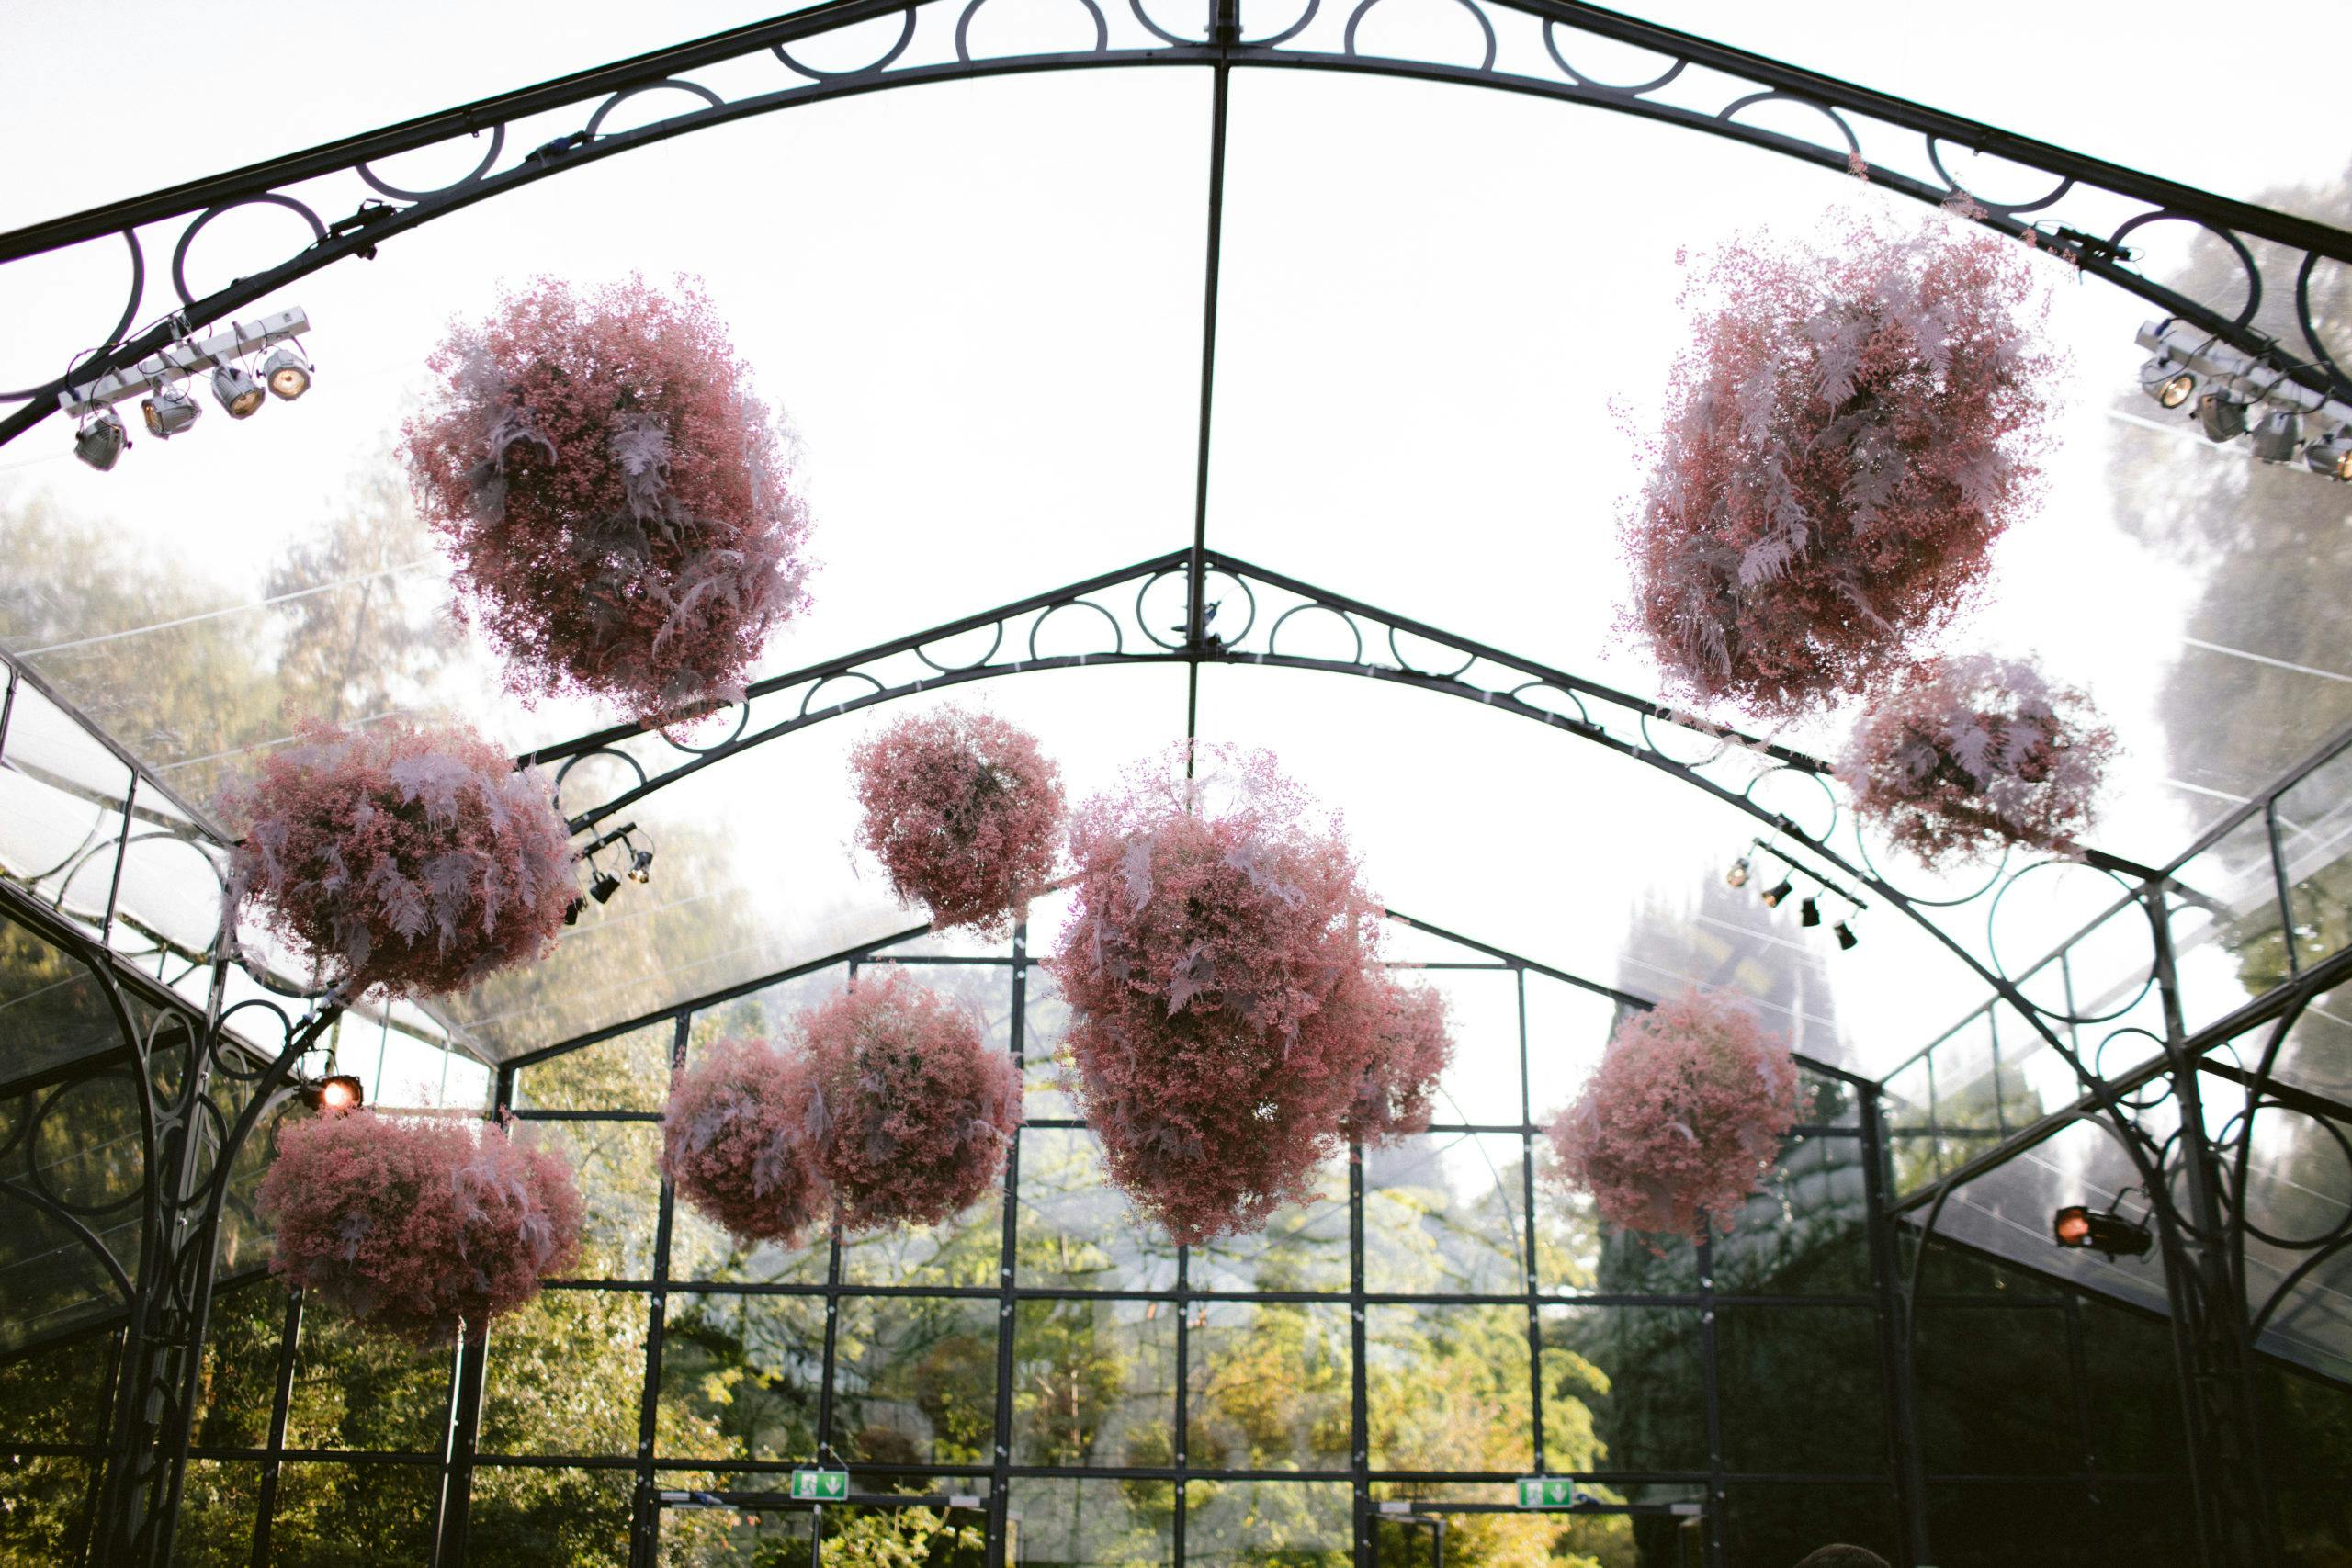 Glass Orangery-Style Wedding Tent with Pink Clouds of Baby’s Breath Suspended from Ceiling | PartySlate